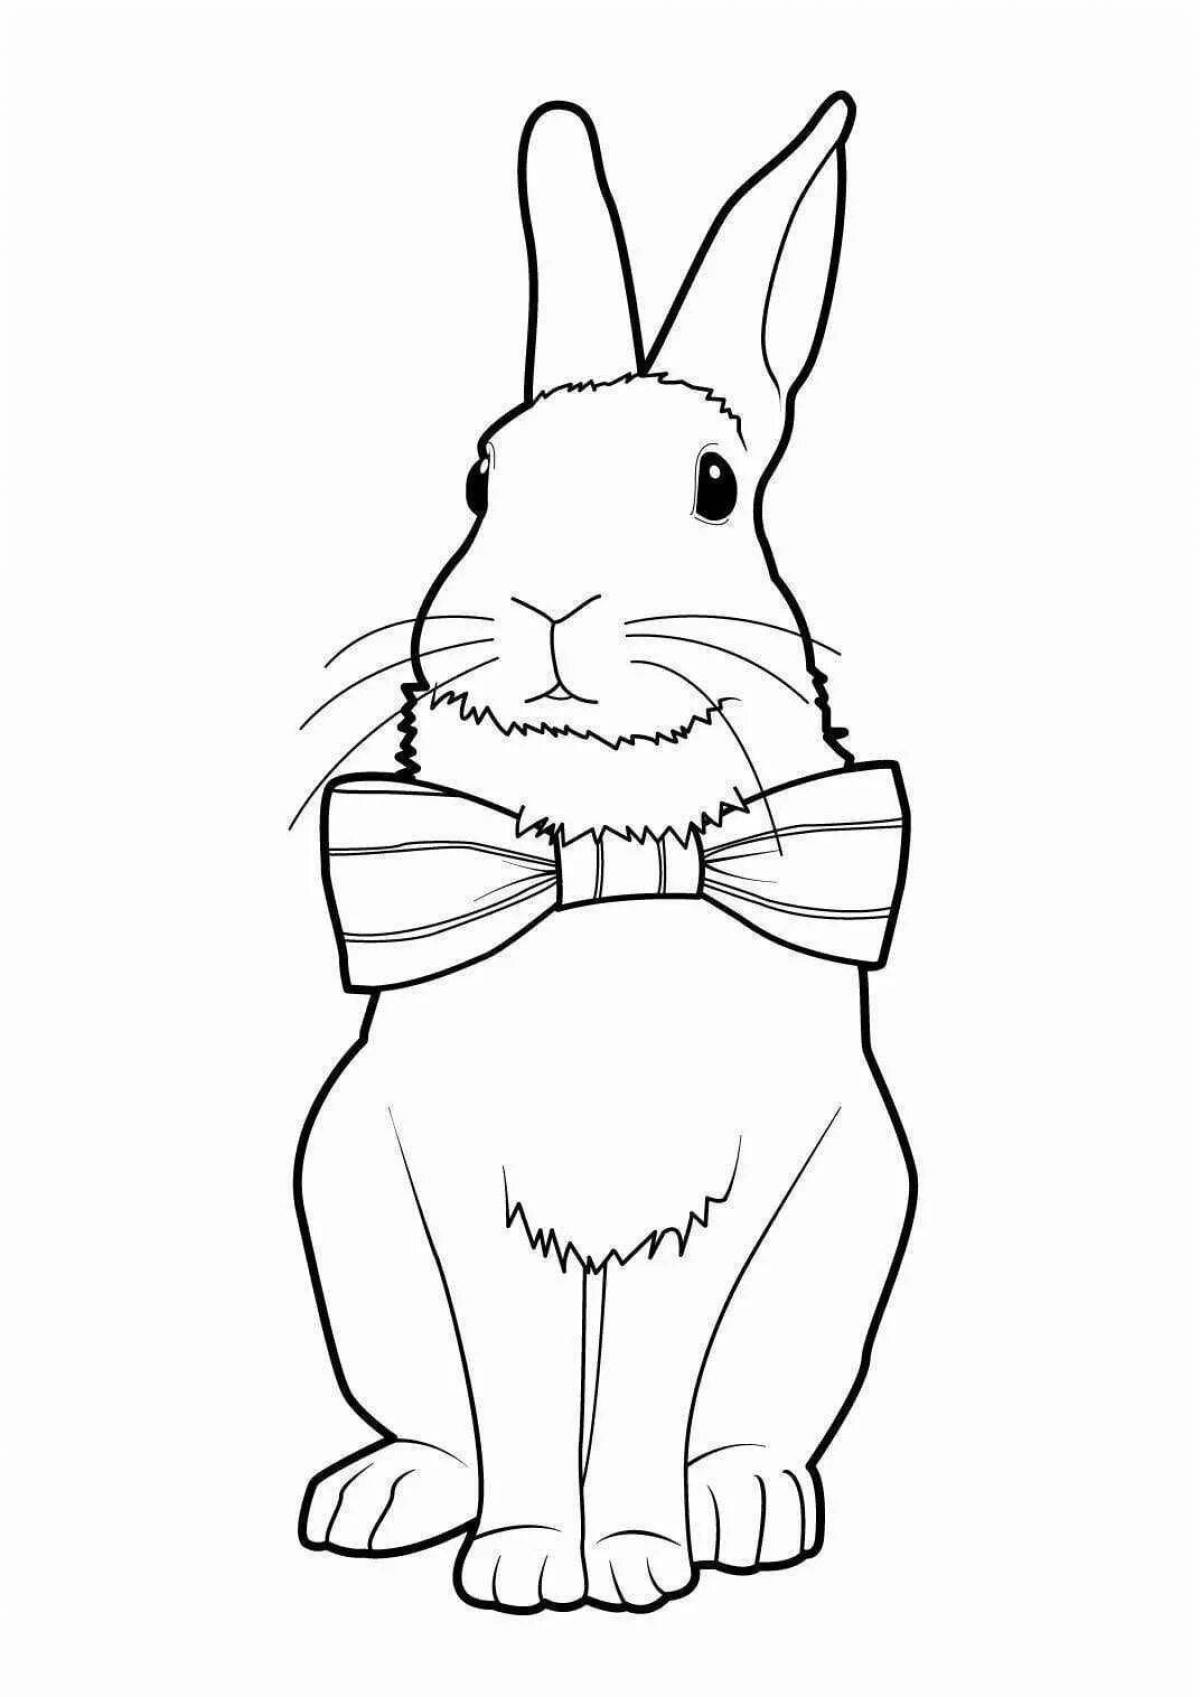 Adorable rabbit coloring page